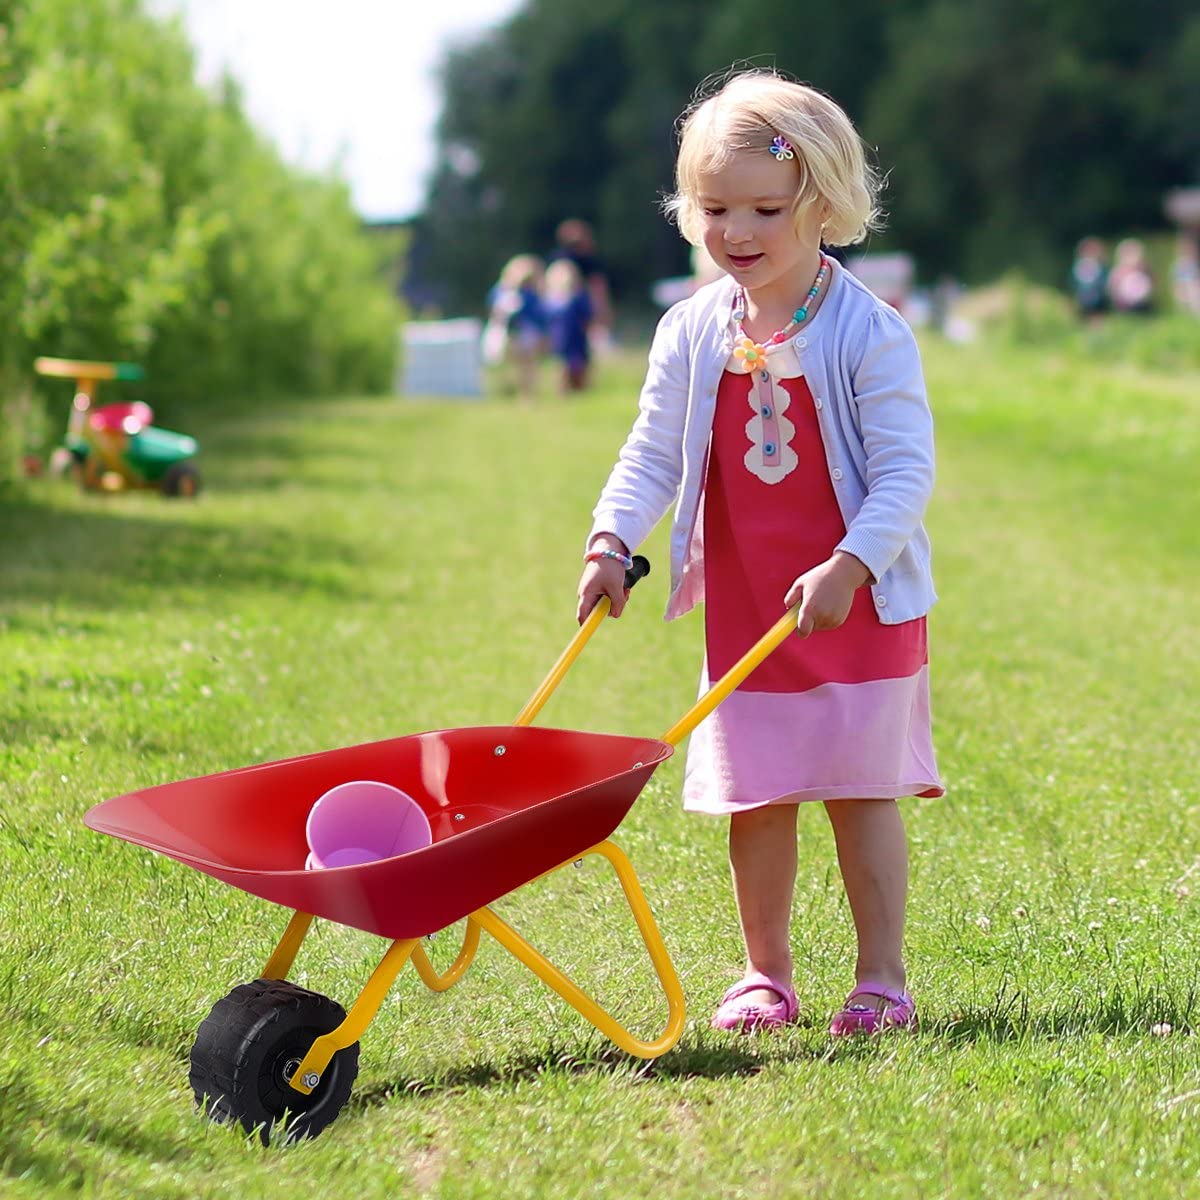 Toddler's Metal Wheelbarrow: Non-Slip Handle, Fun and Functional in Vibrant Red